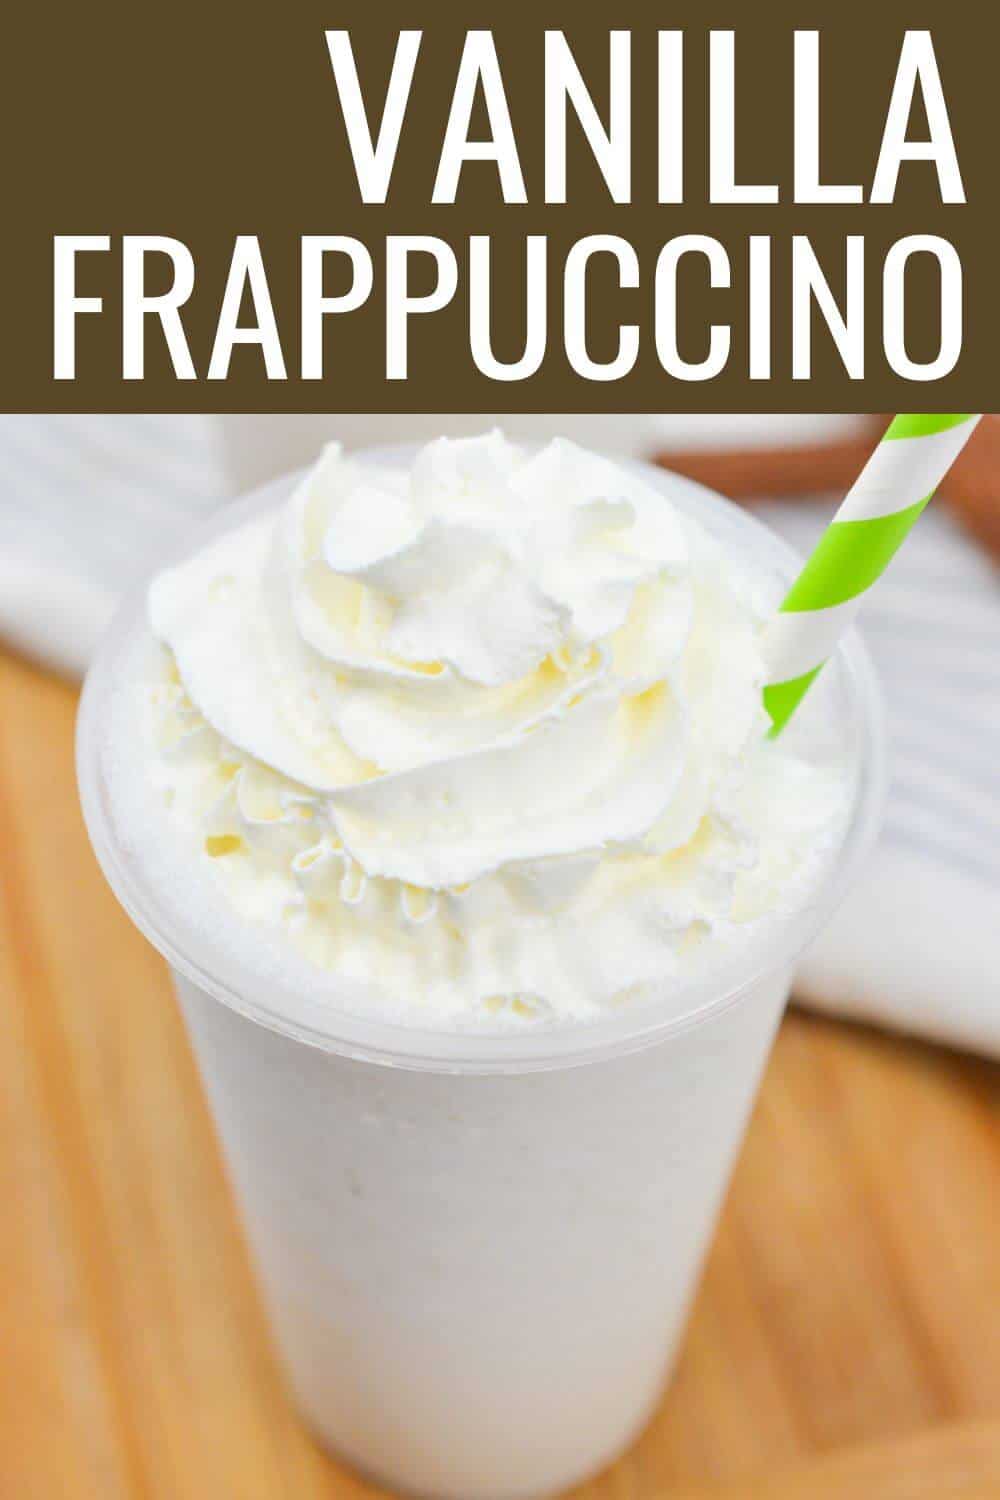 Vanilla bean frappuccino with recipe title text overlay.